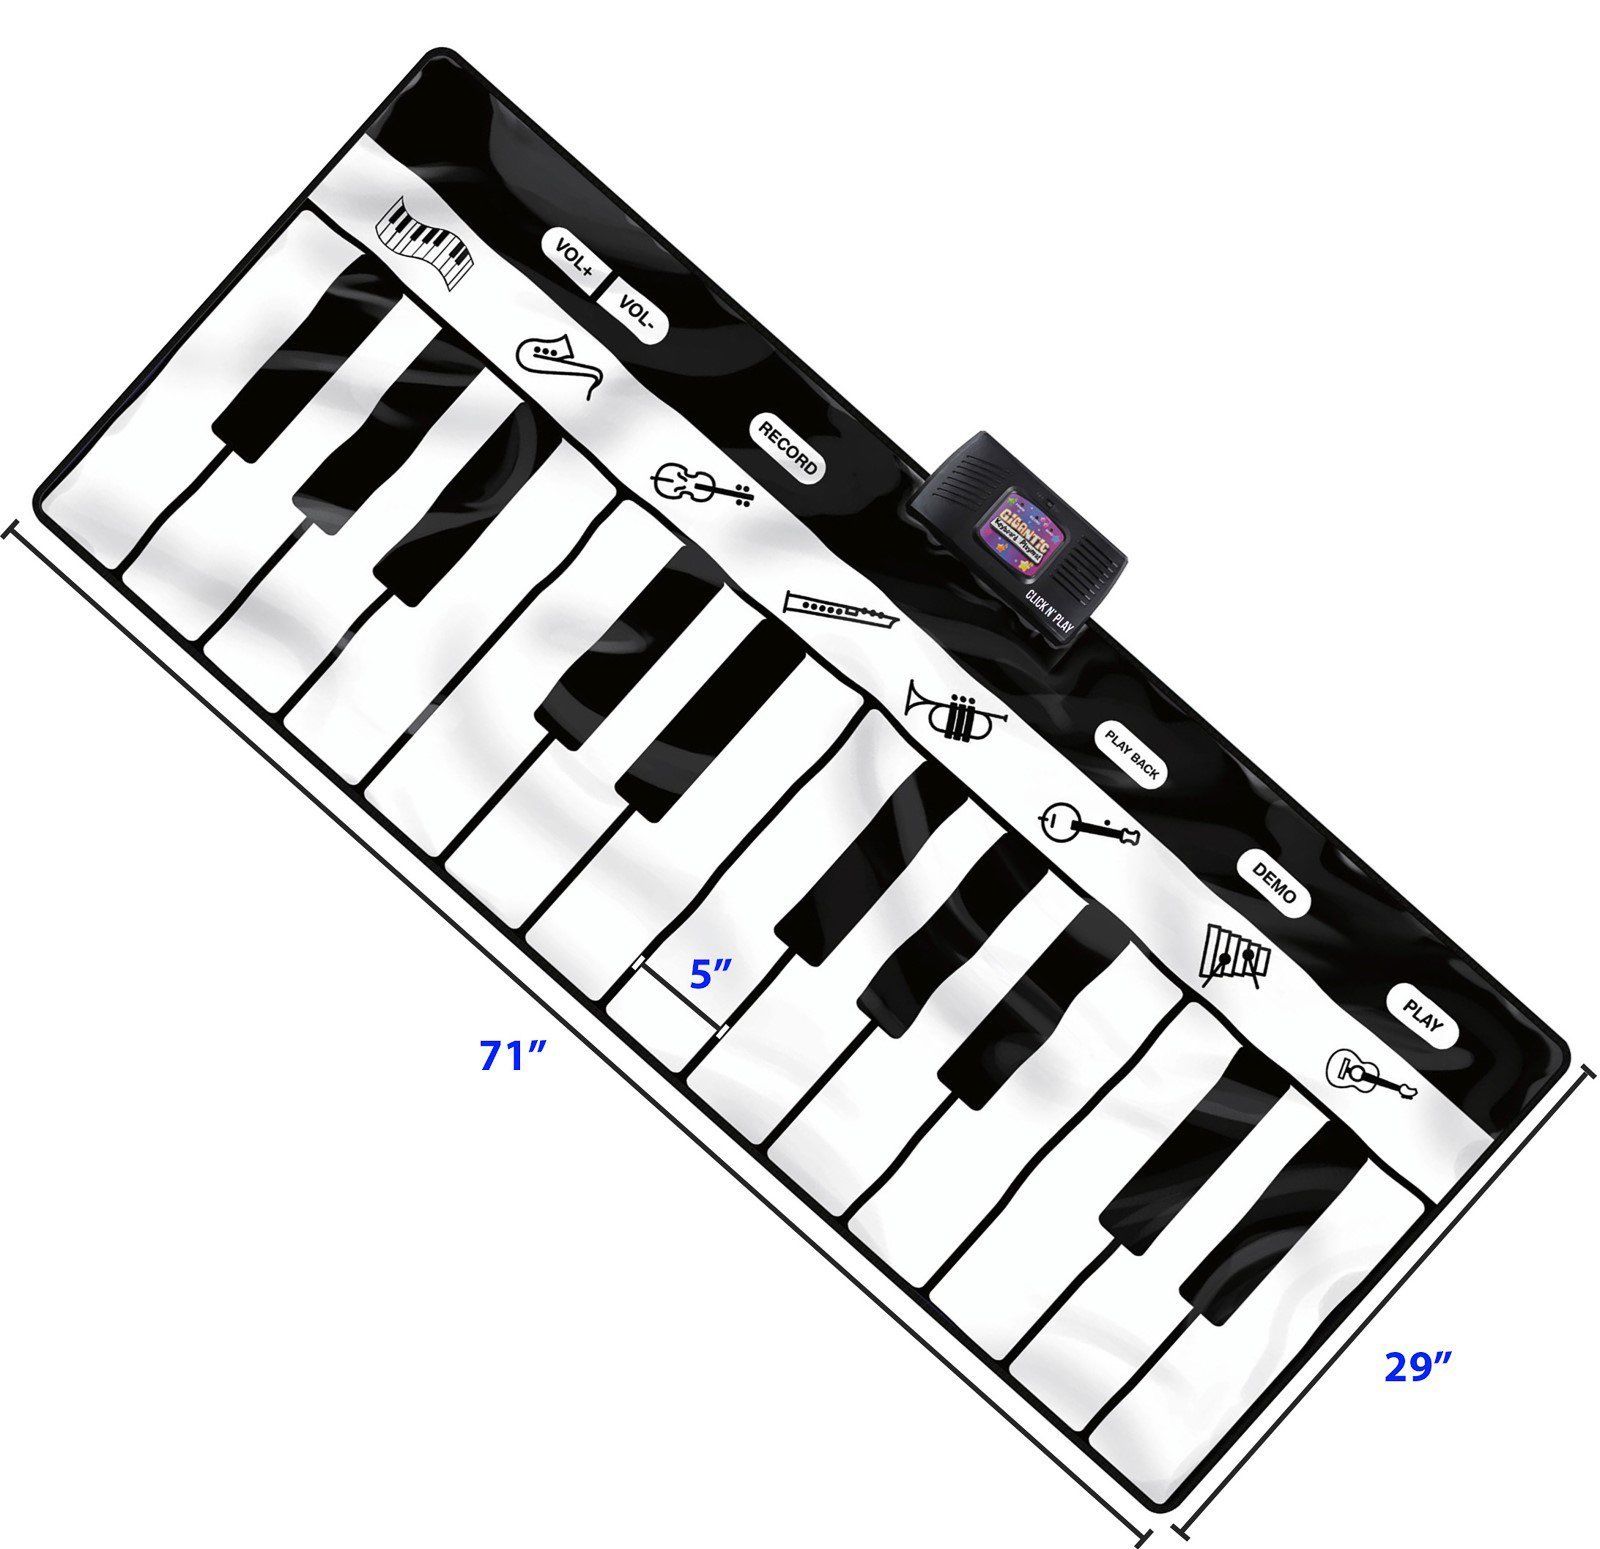 Musical Keyboard Drawing at GetDrawings.com | Free for personal use ...